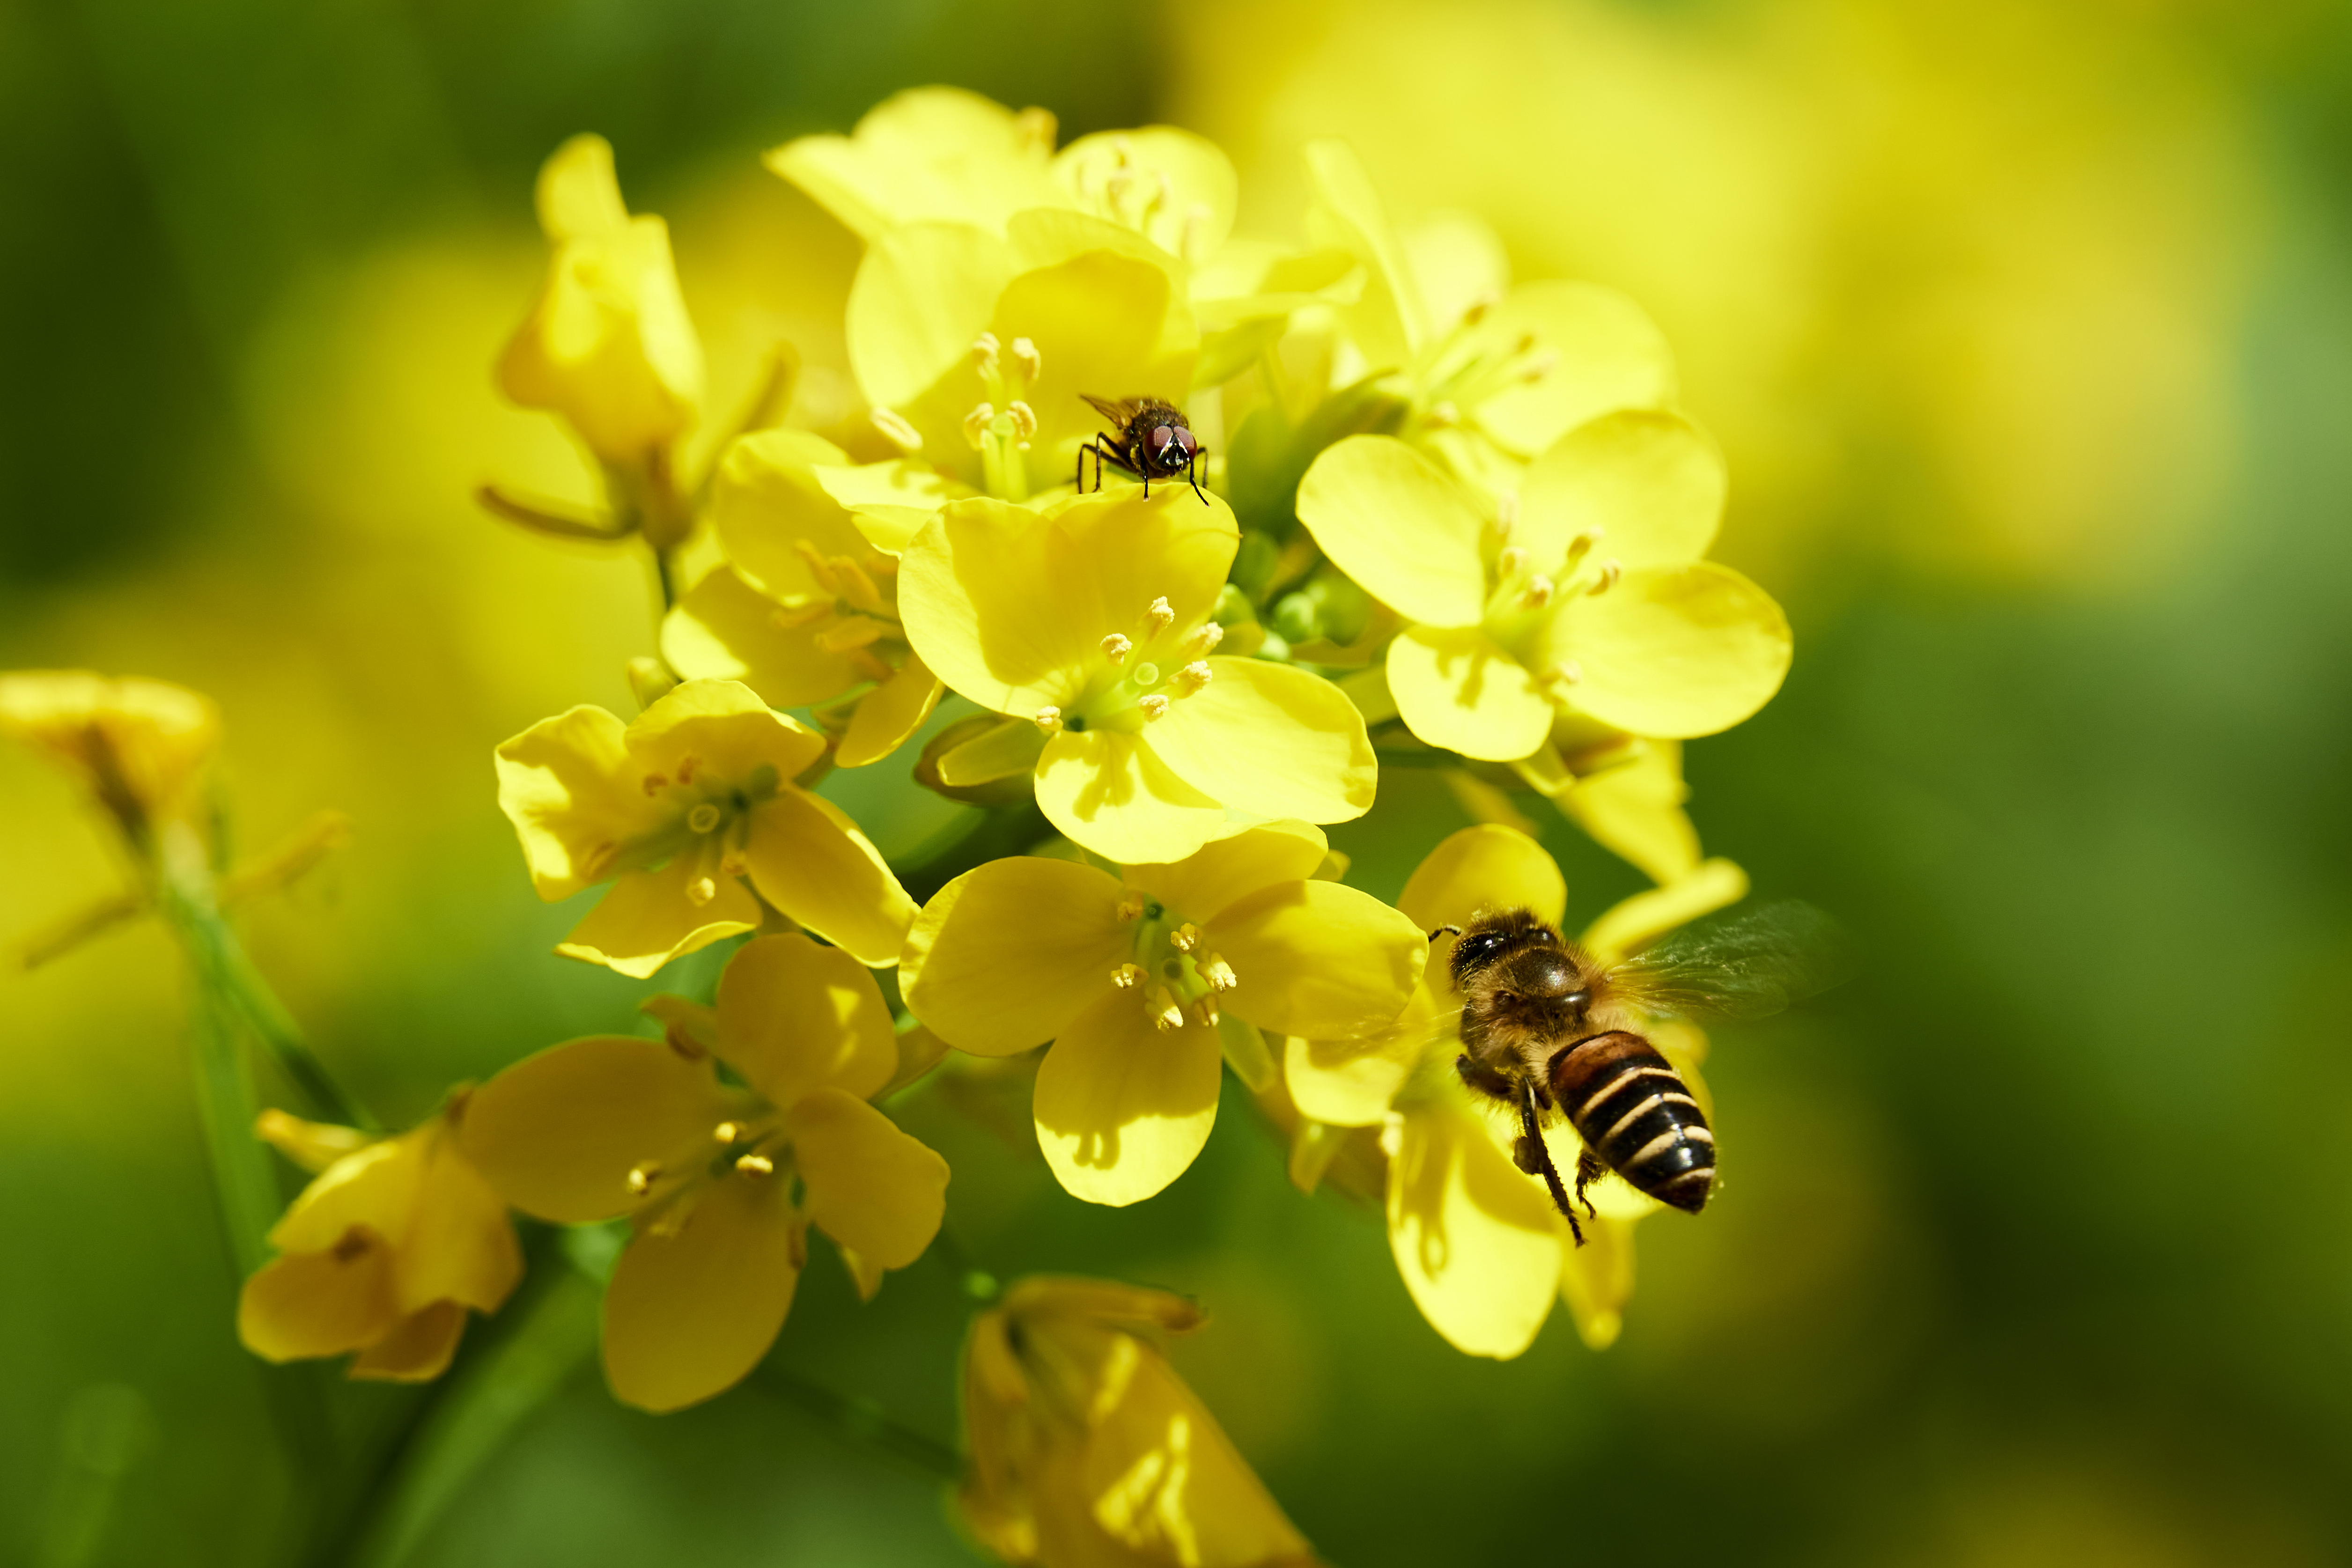 General 5023x3349 bees flowers nature blurred blurry background insect petals